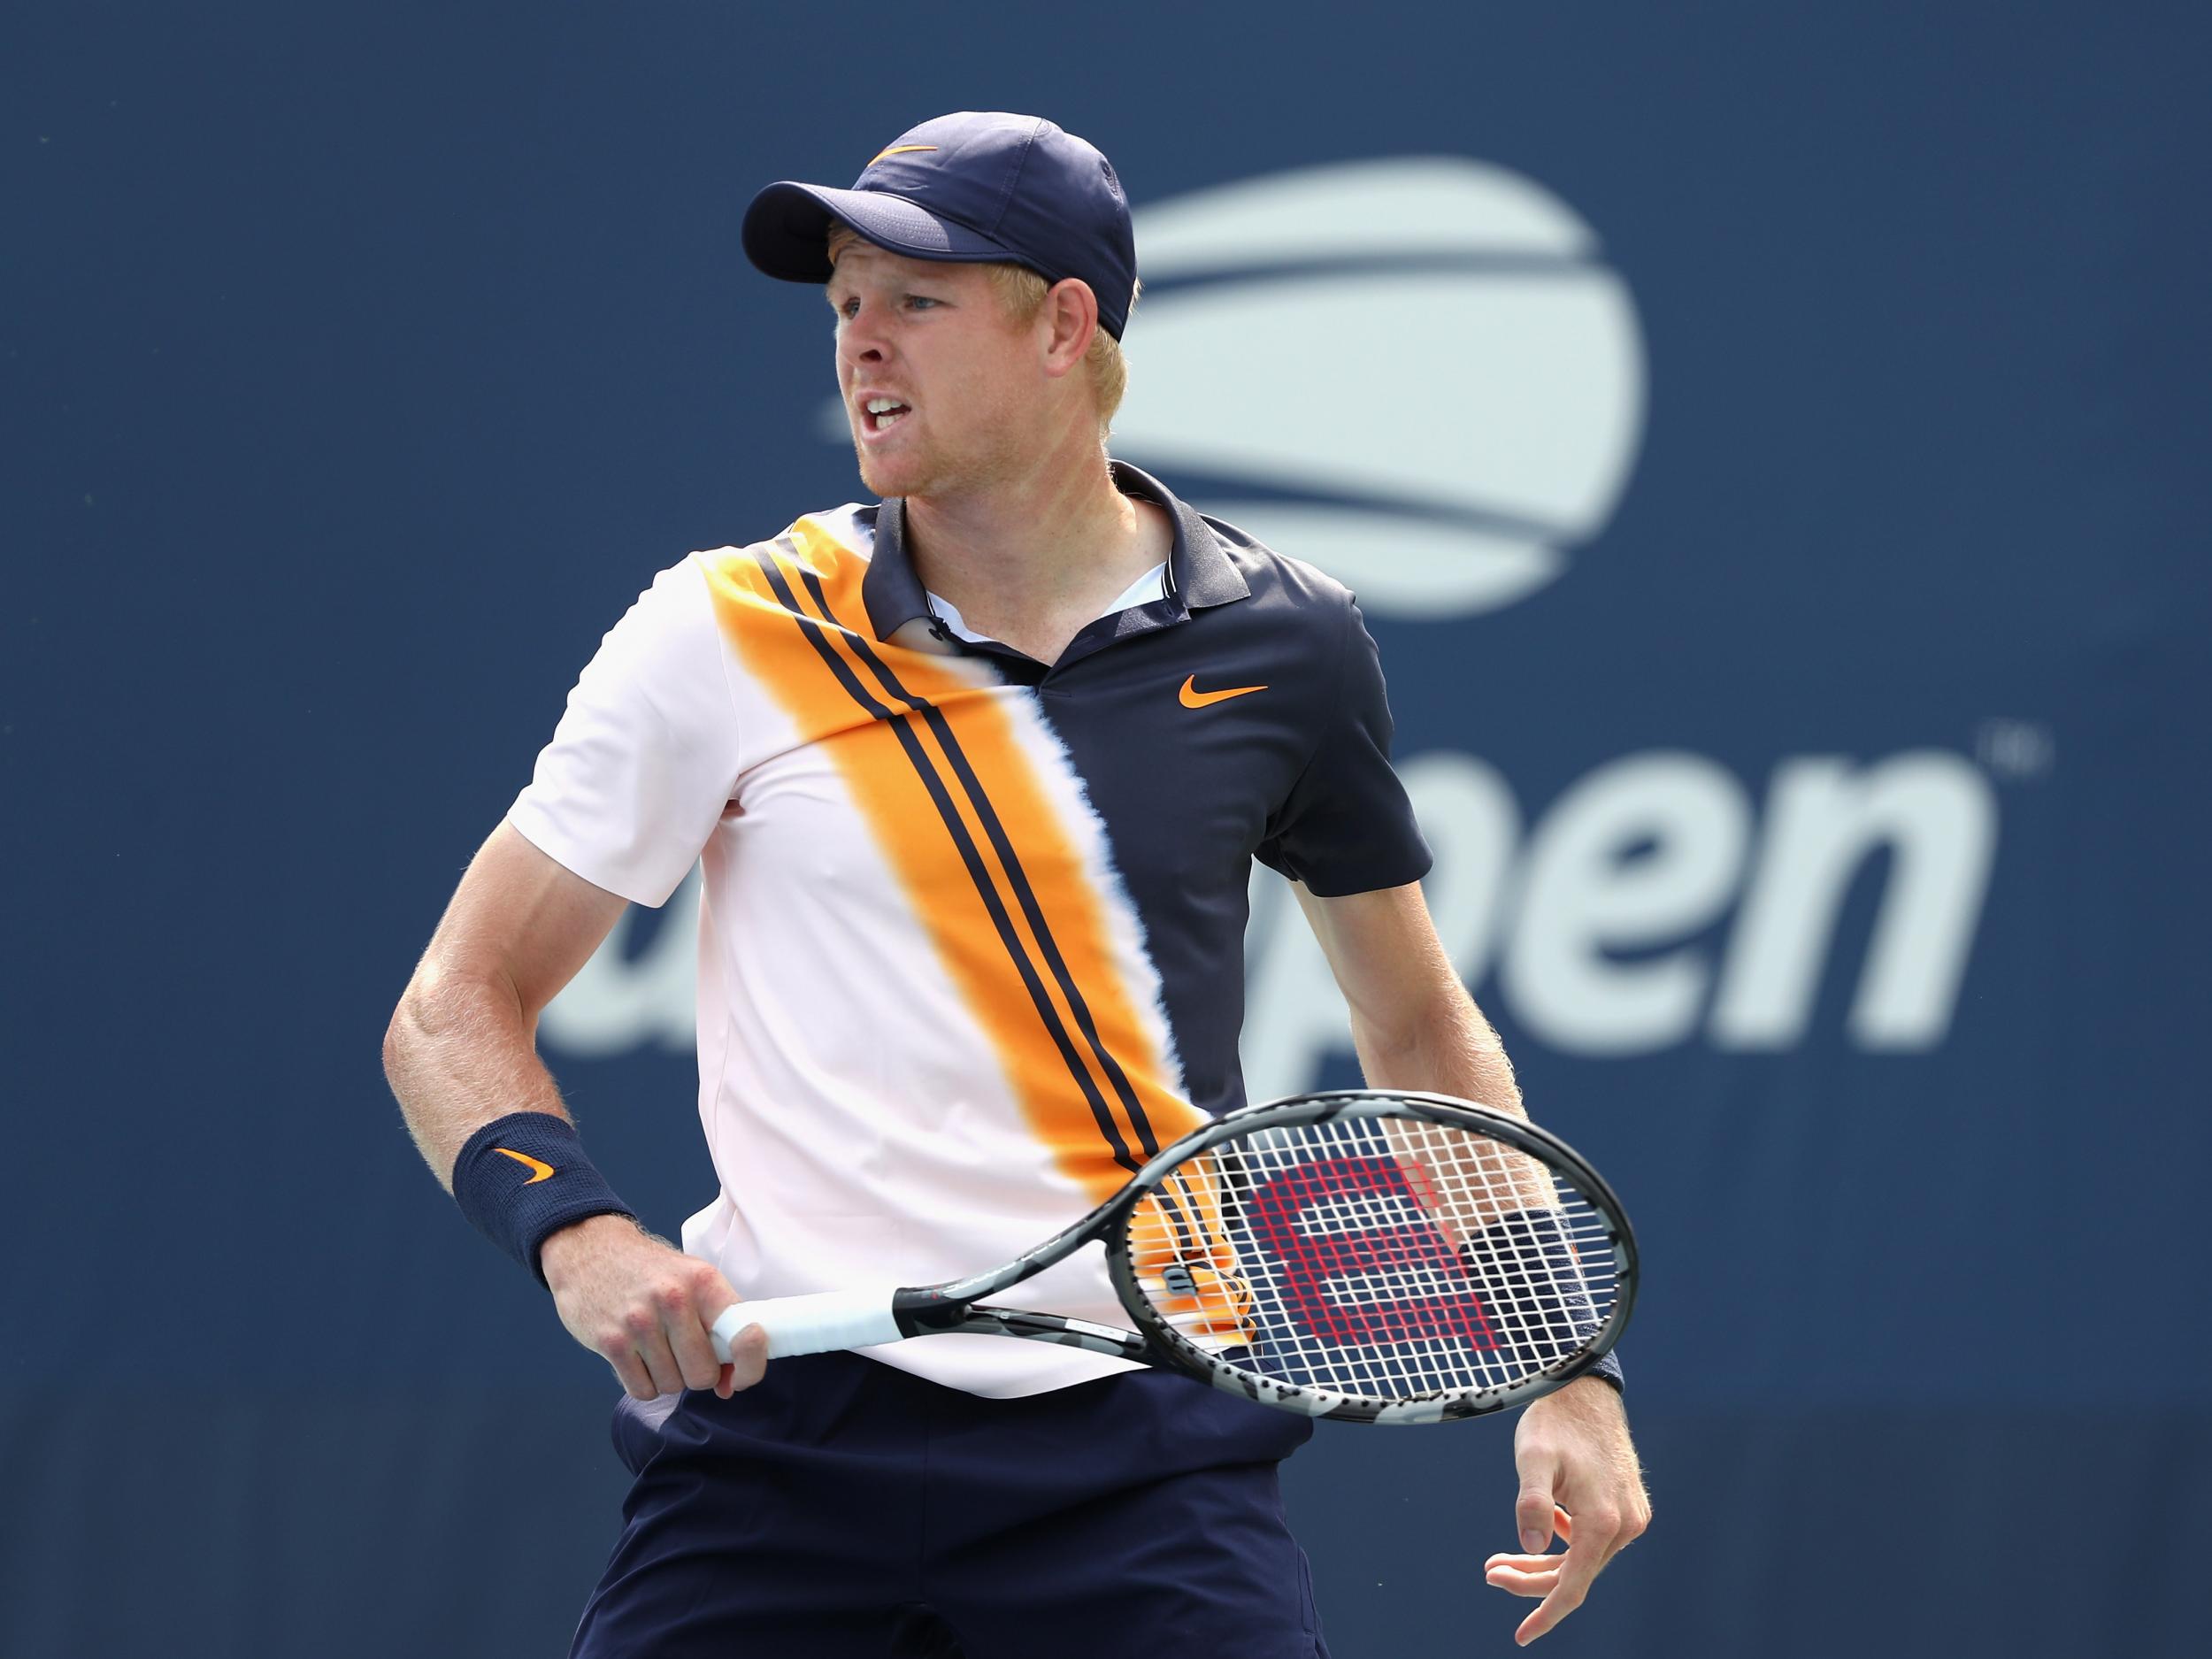 Kyle Edmund was beaten in four sets by Paolo Lorenzi